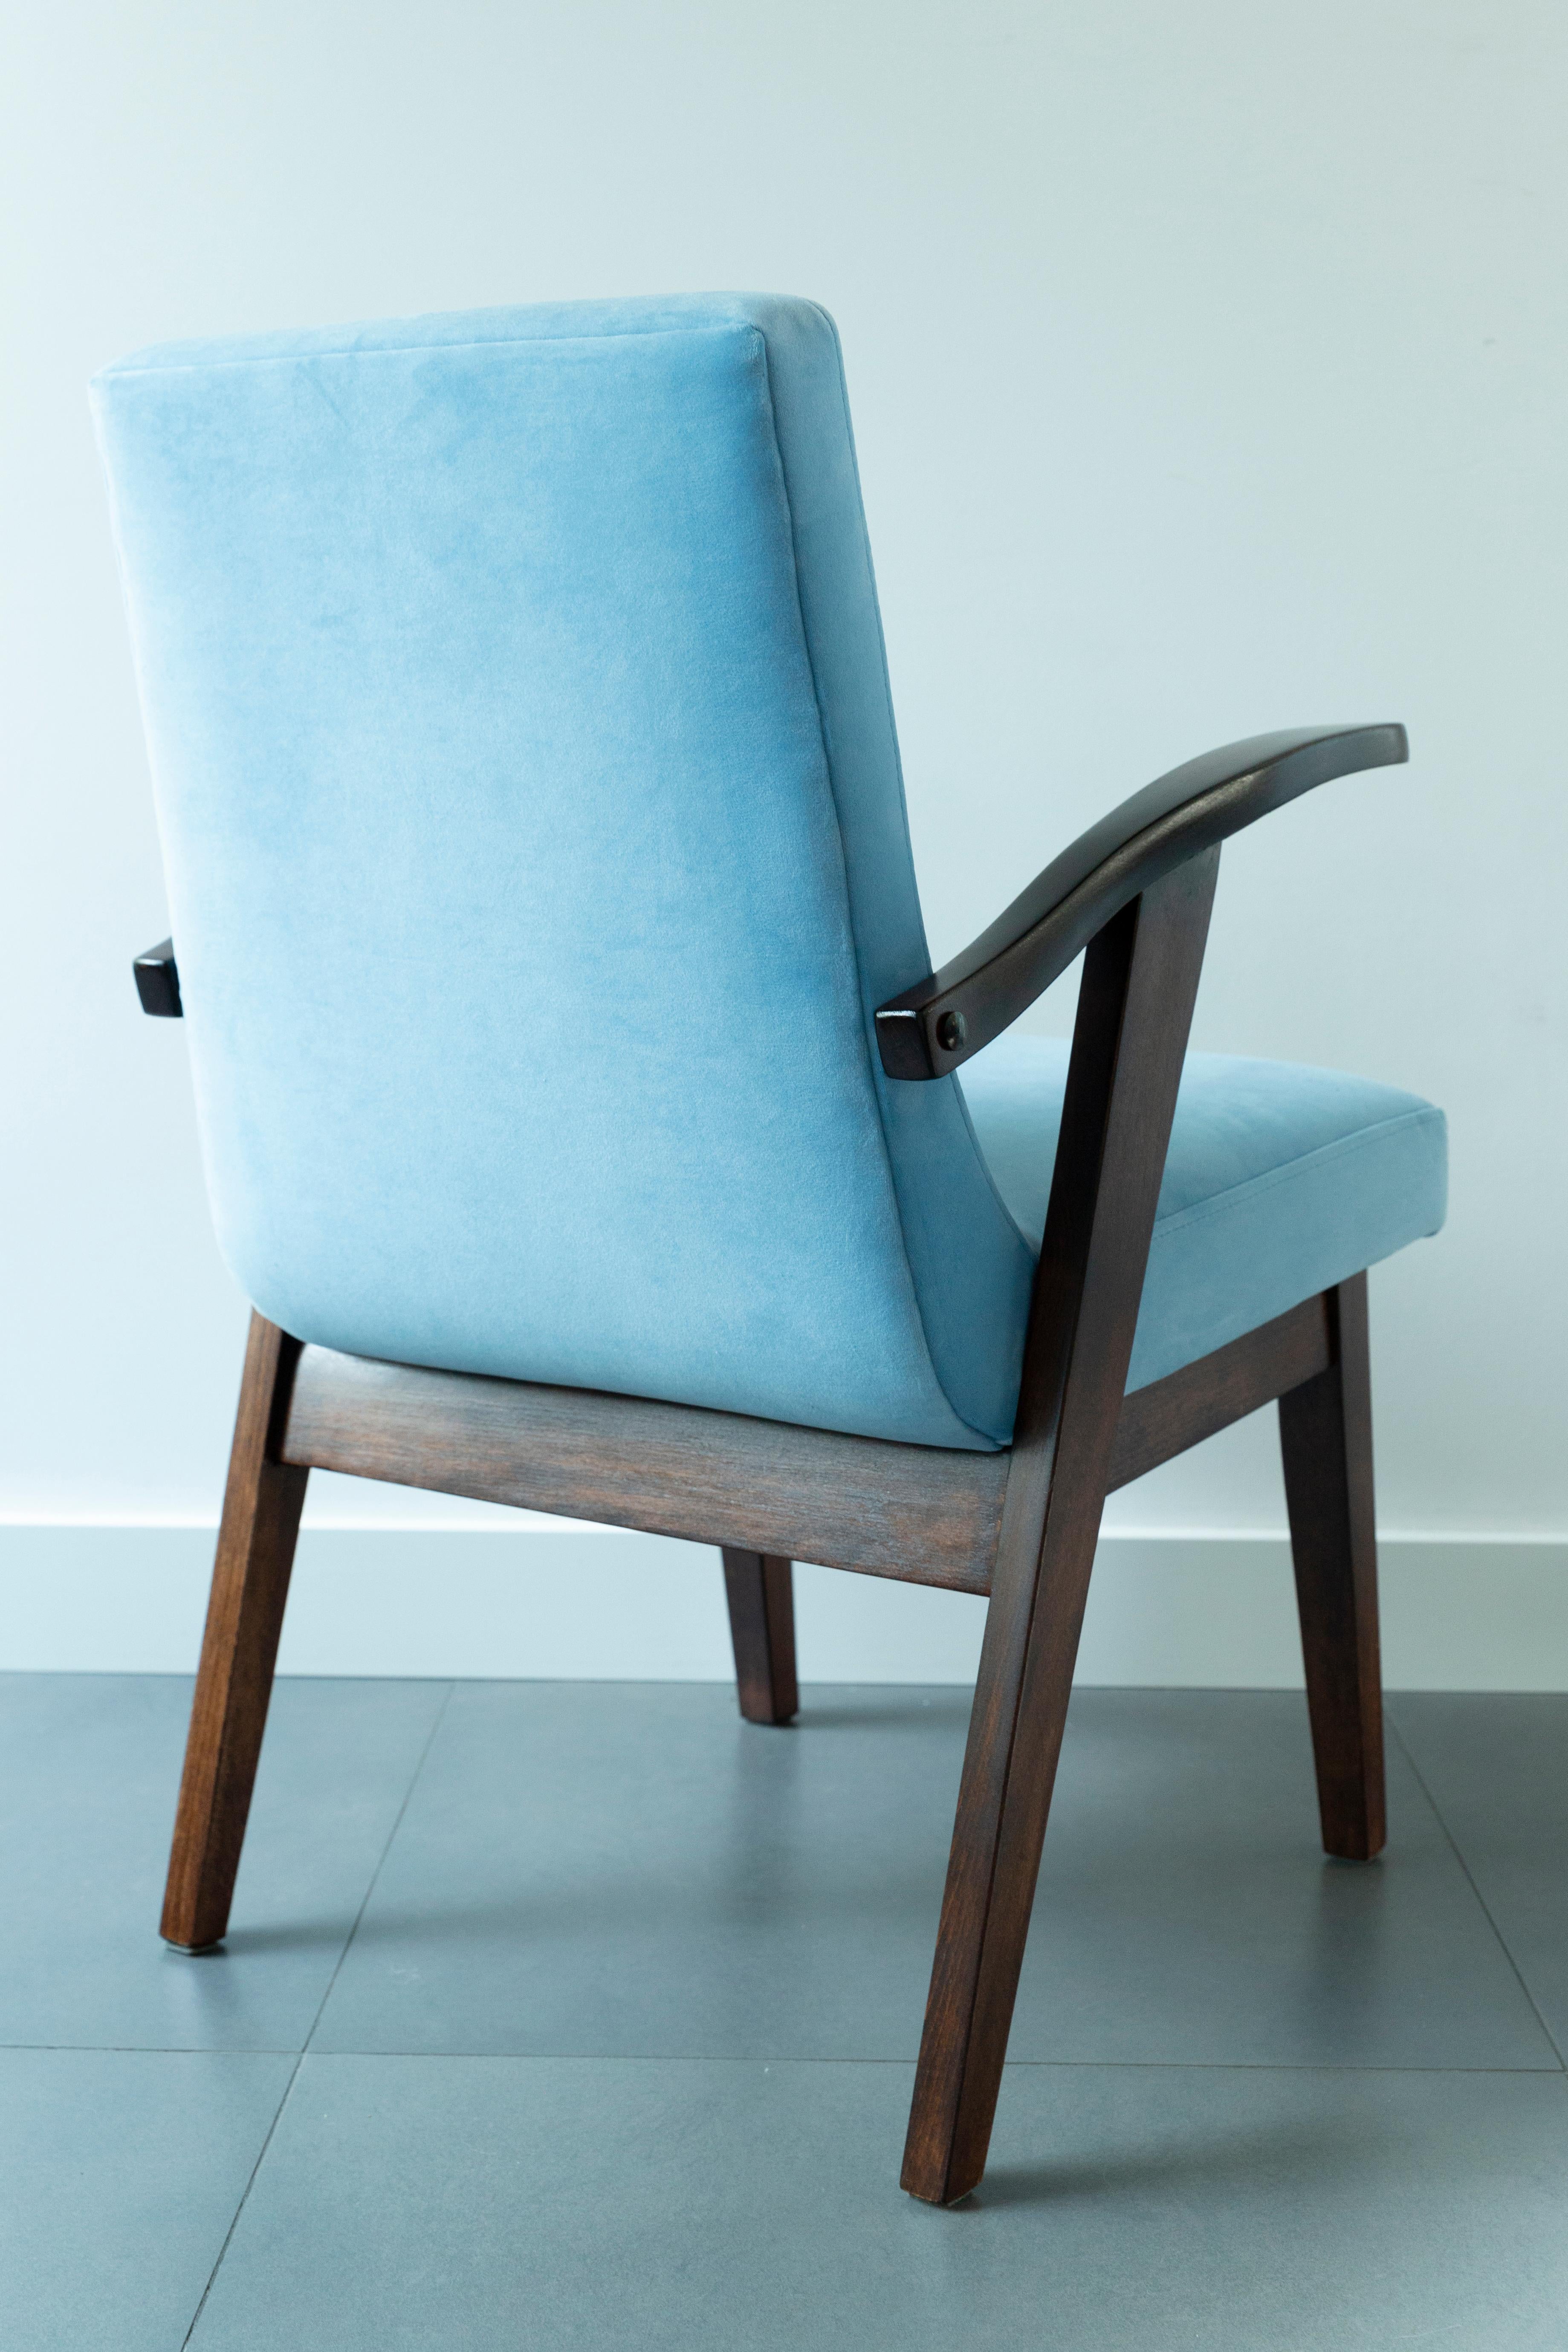 Set of Six 20th Century Armchairs in Baby Blue Velvet, Mieczyslaw Puchala, 1960s For Sale 6